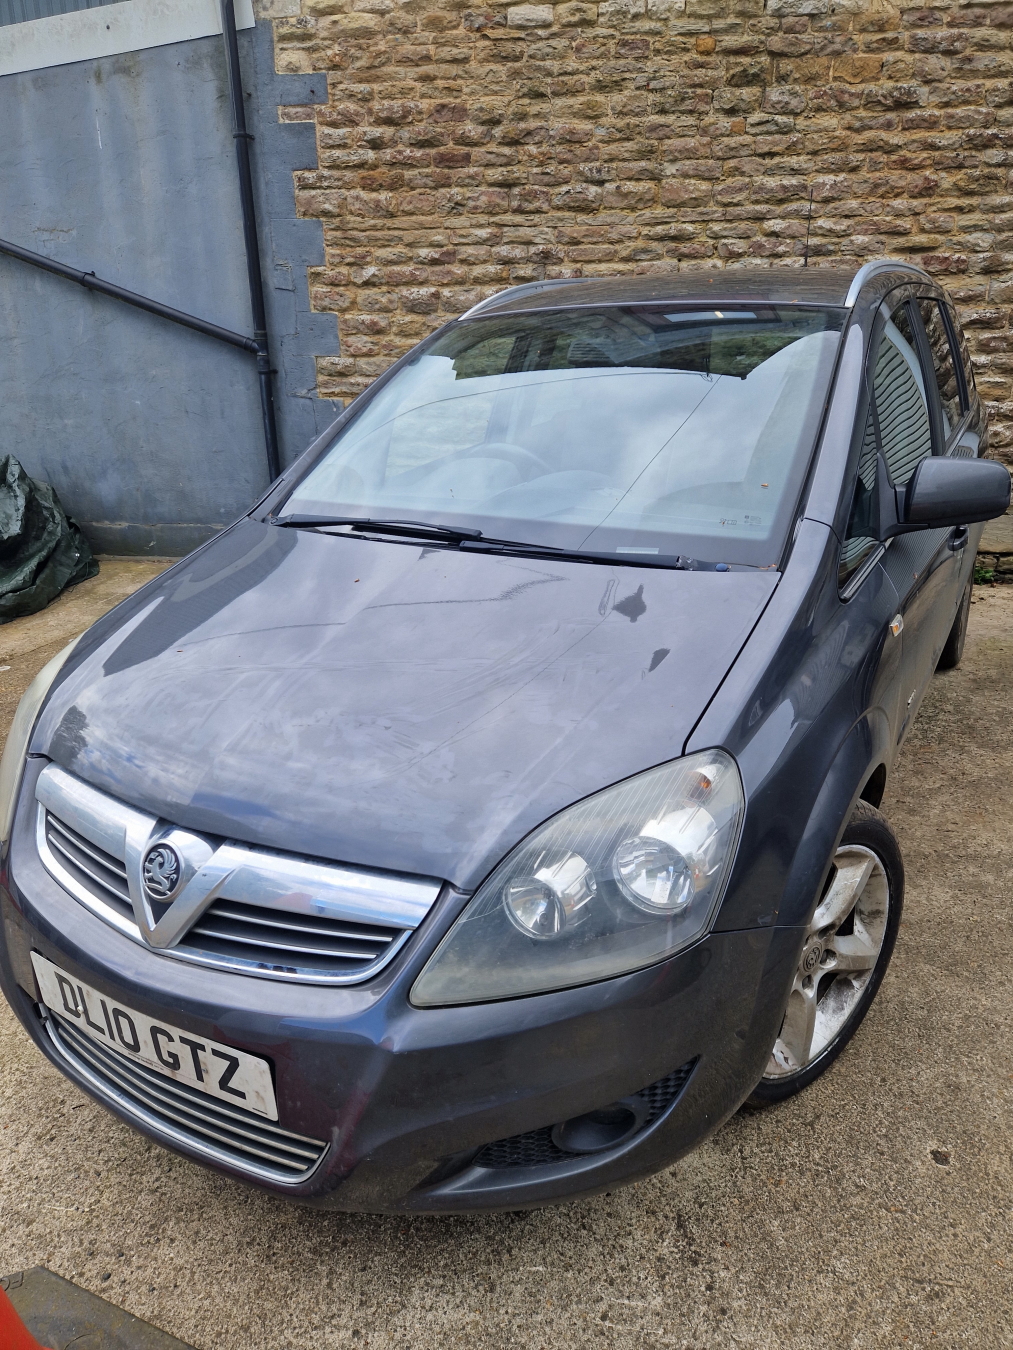 A 2010 VAUXHALL ZAFIRA 1.8 PETROL FOR SPARES OR REPAIRS (NON RUNNER) WITH 2 MONTHS MOT.